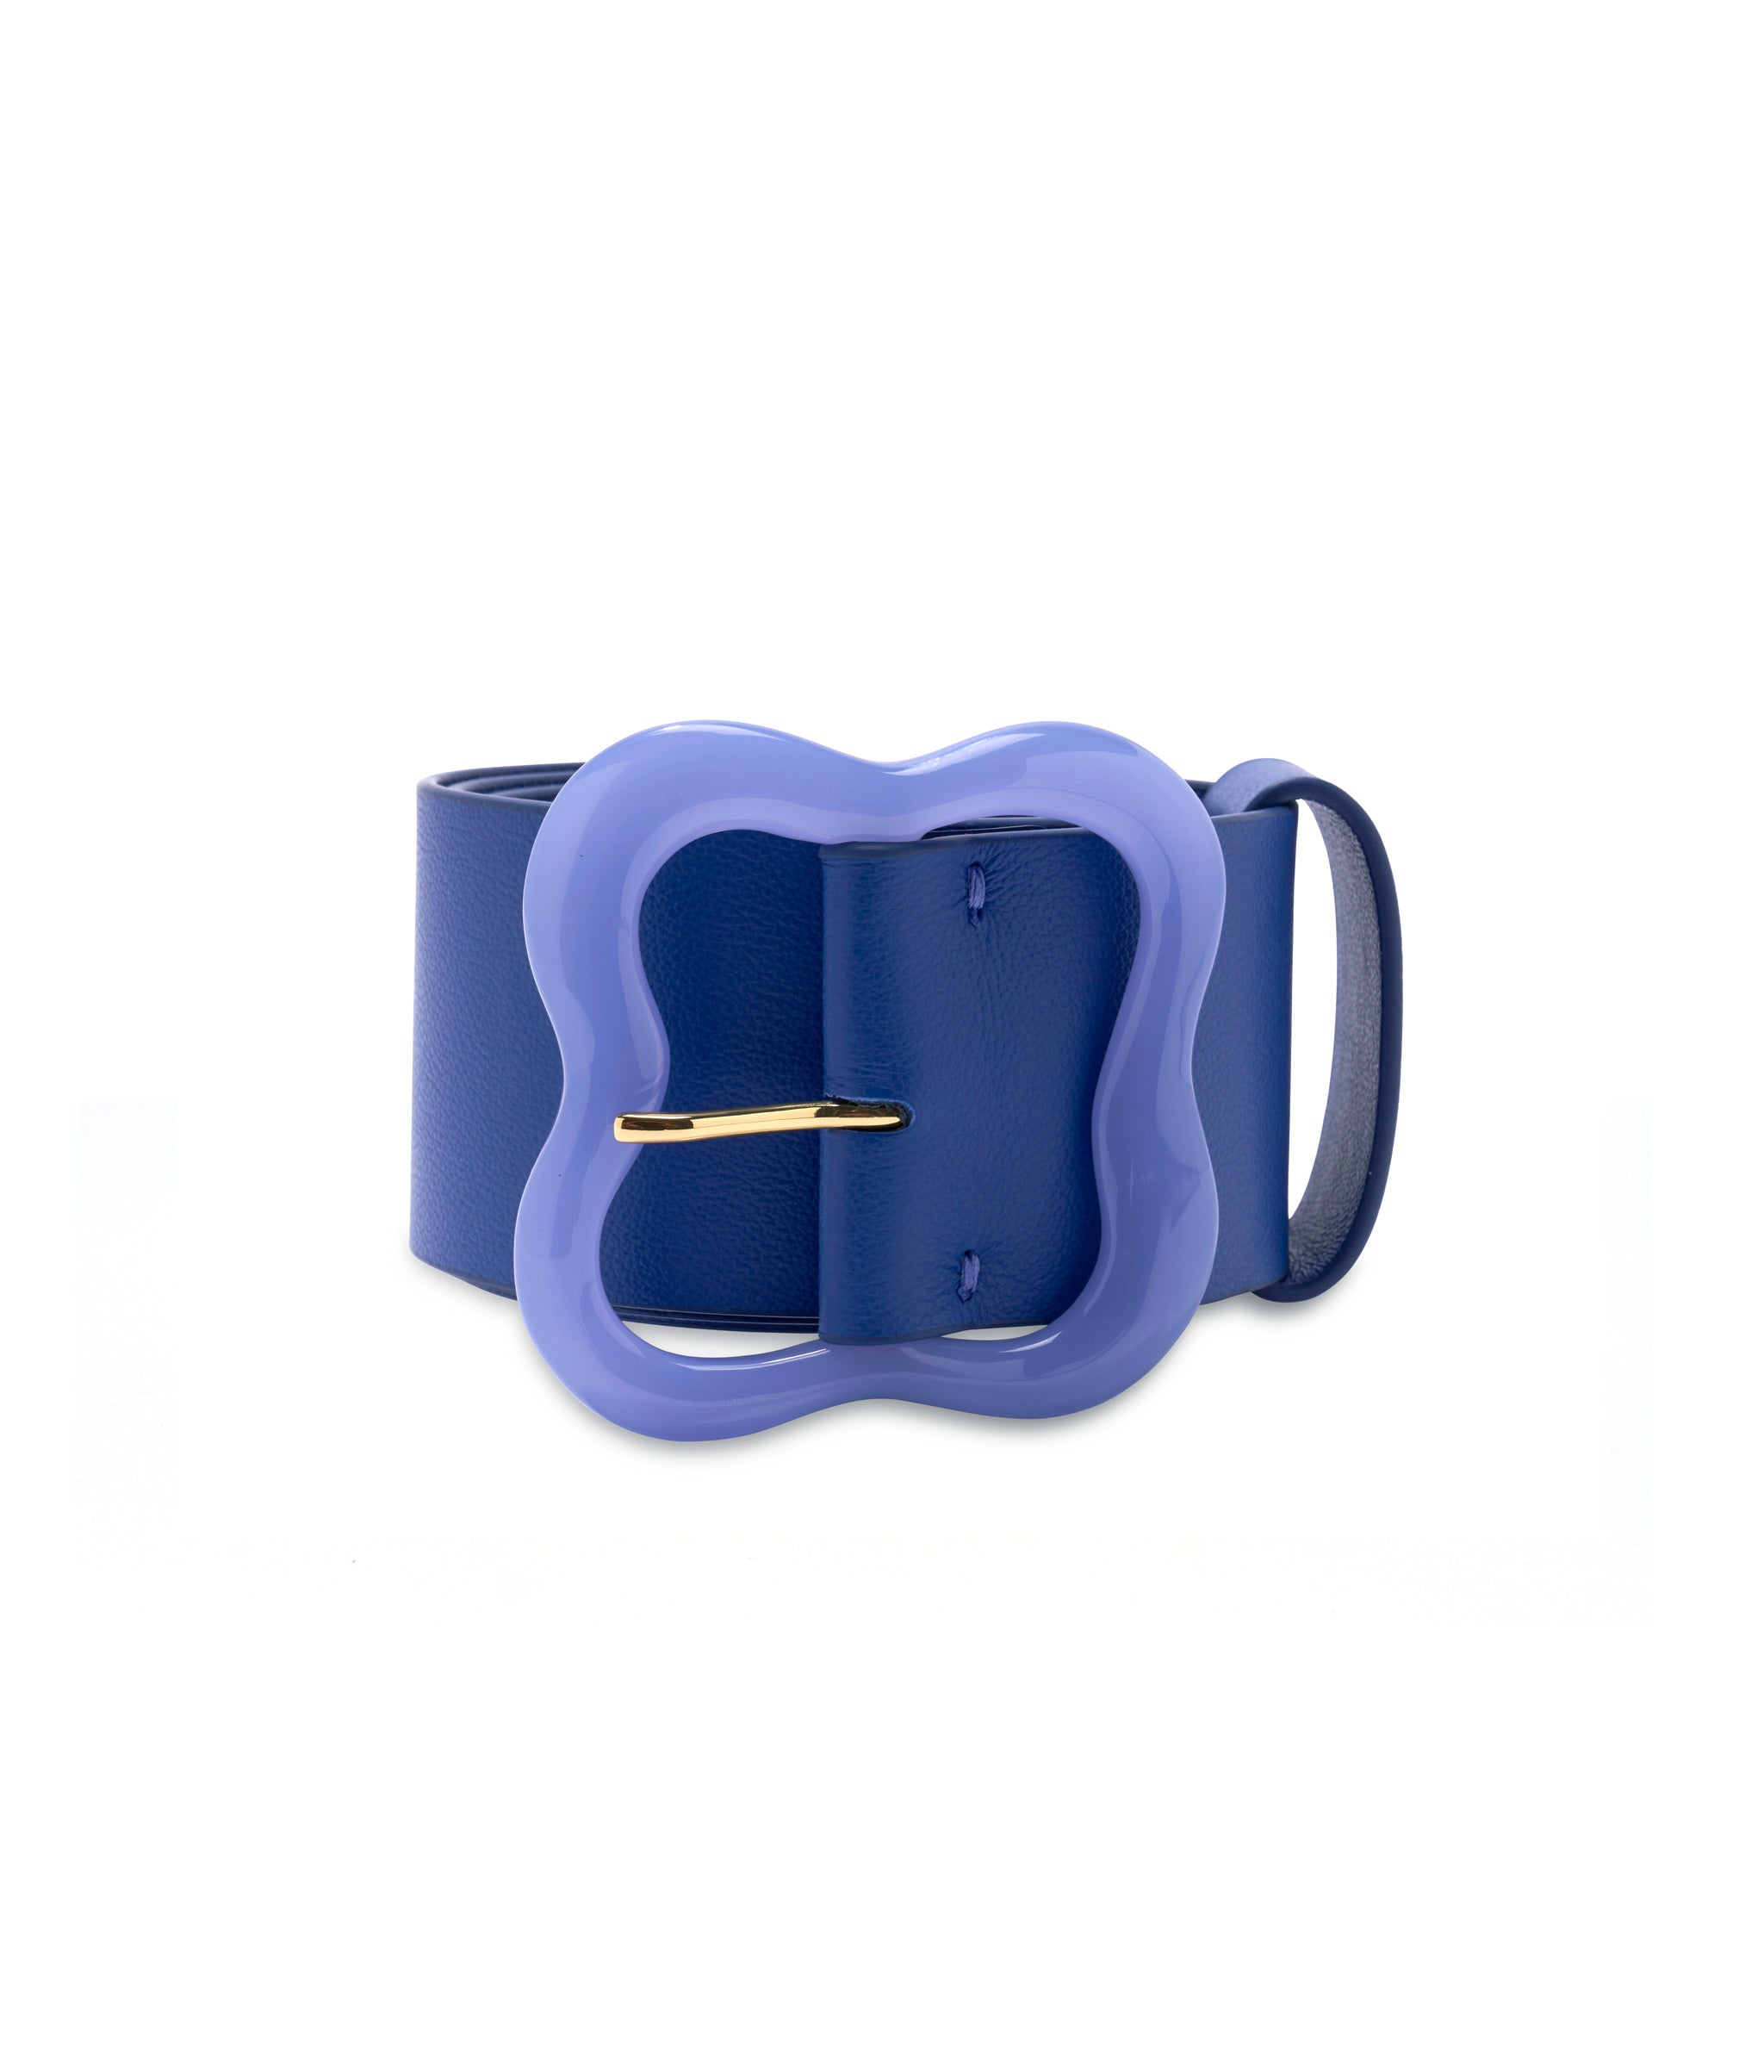 Florence Belt in Azure. Blue leather belt with abstract clover-inspired buckle in cornflower blue resin.